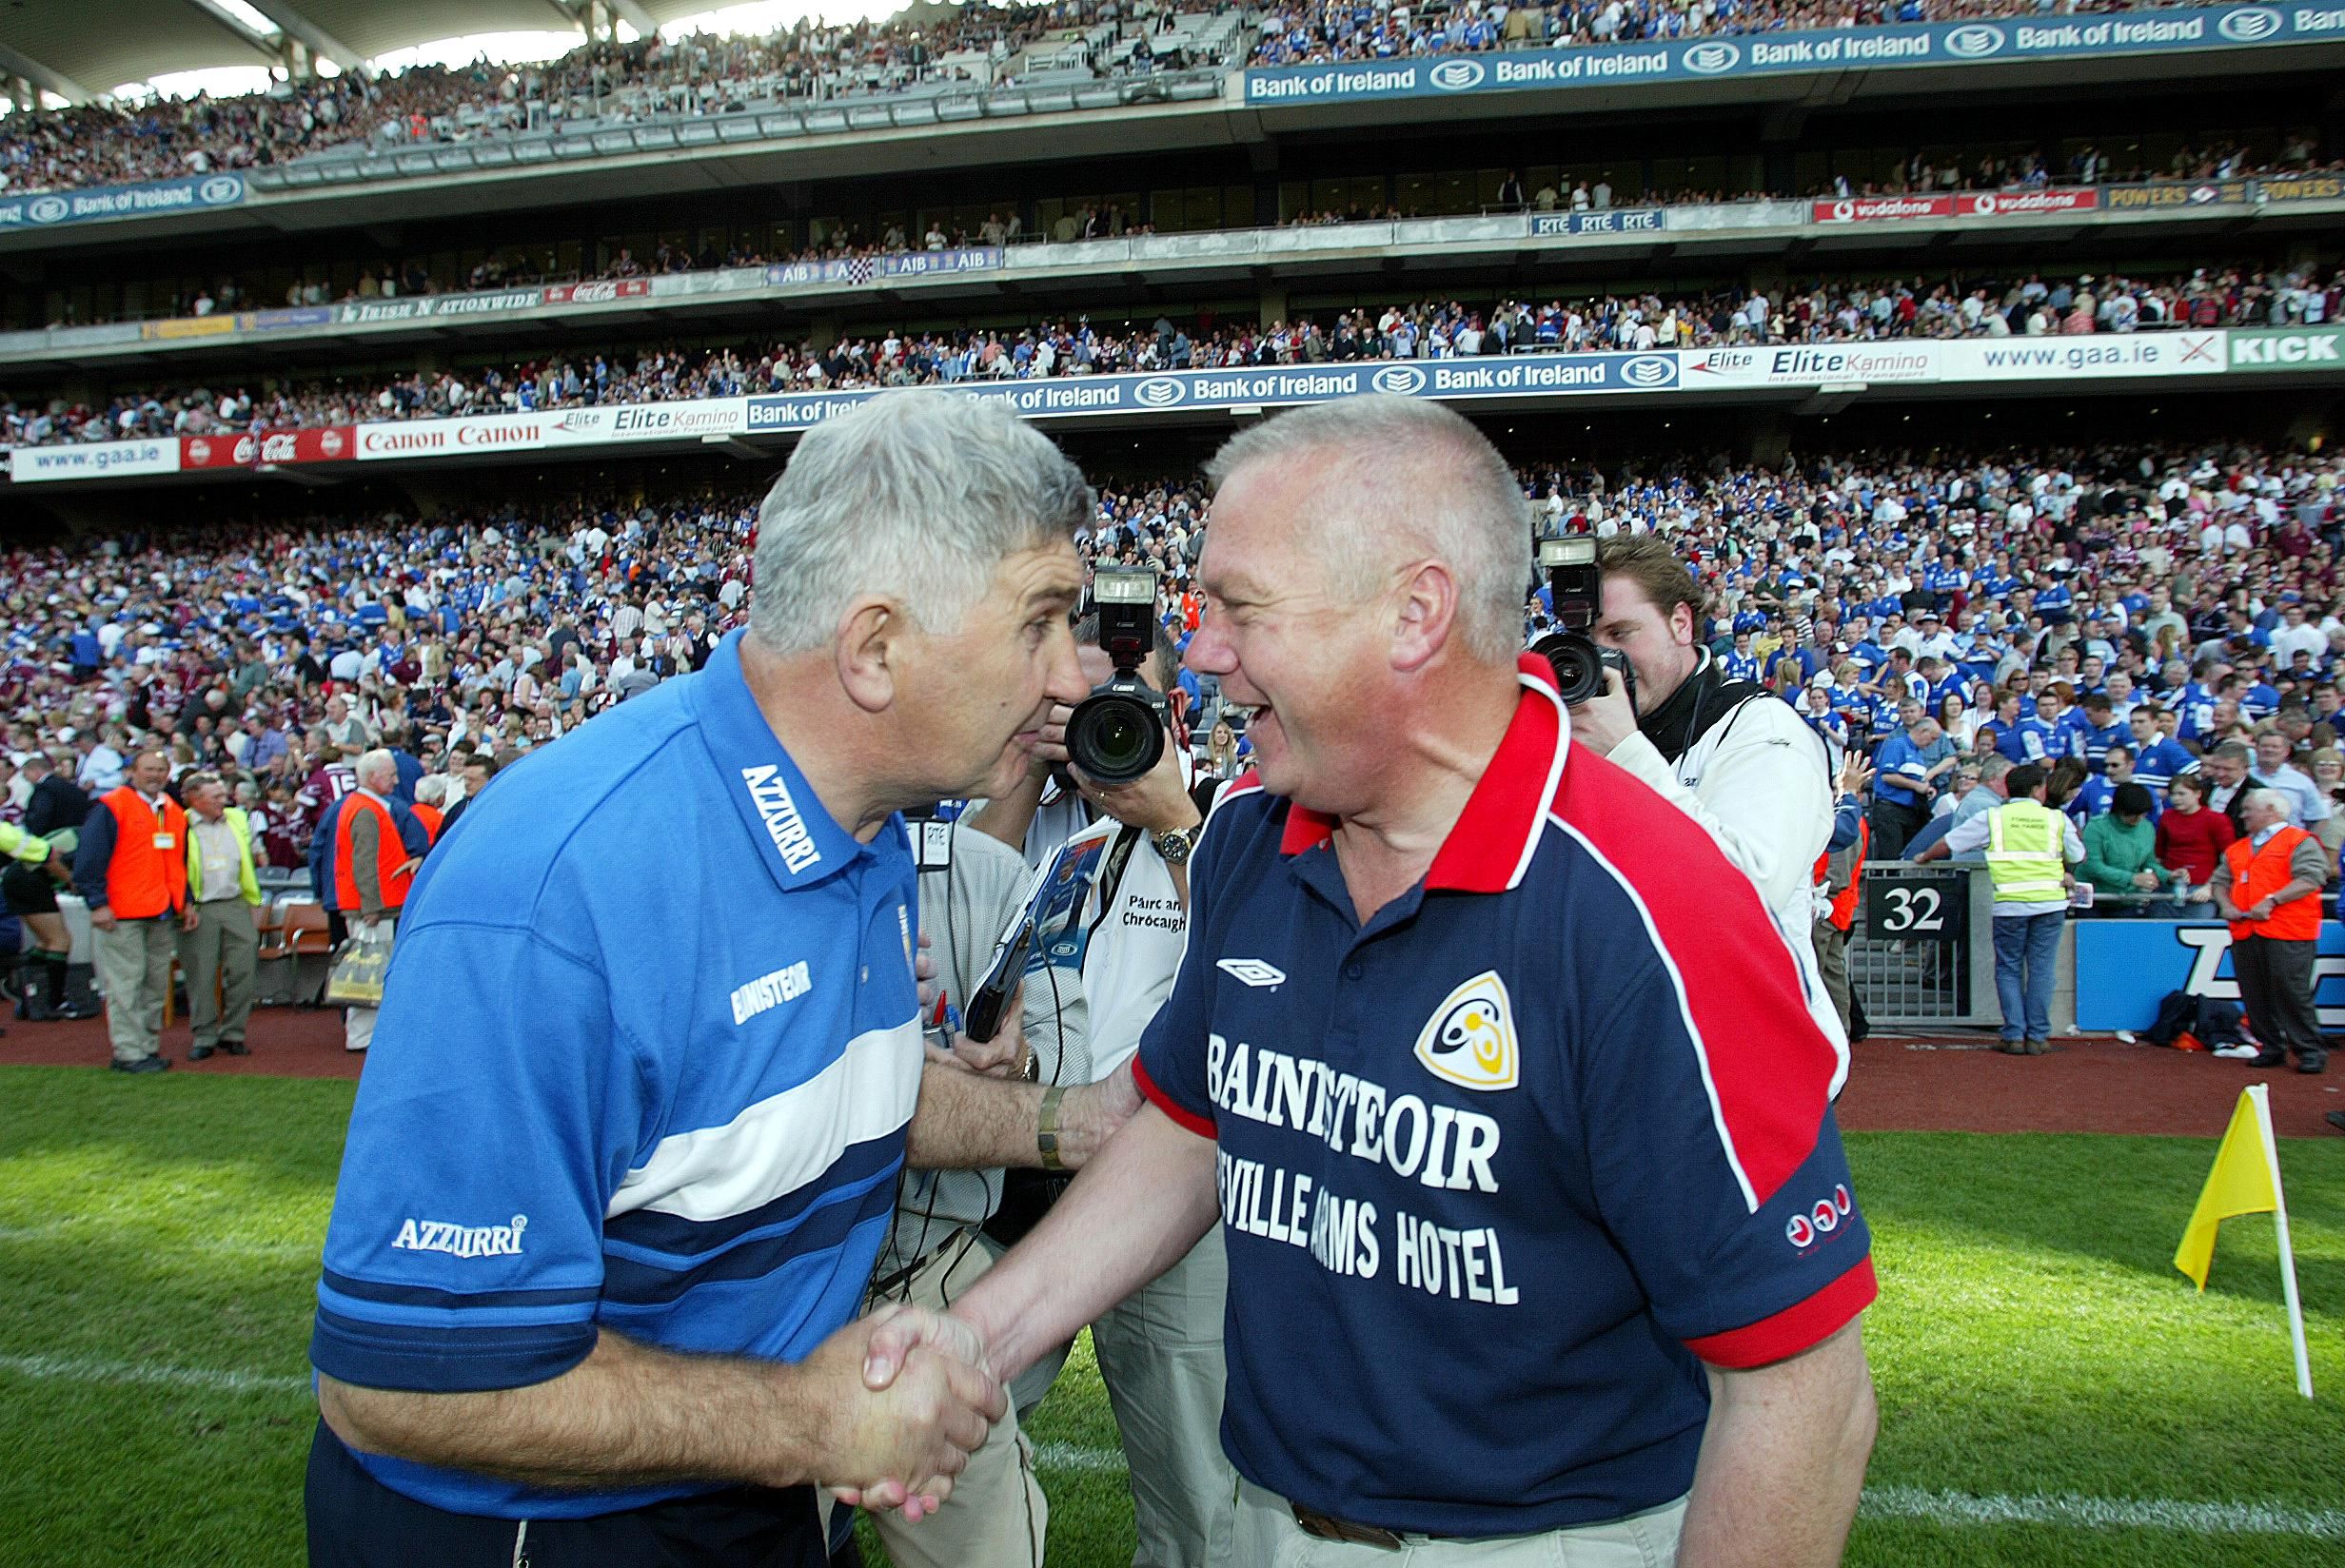 Kerry GAA legend Paidi O'Se 15/12/2012 Leinster Football Championship Final Laois vs Westmeath 18/7/2004 Westmeath manager Paidi O'Se and Laois manager Mick O'Dwyer after the game Mandatory Credit ©INPHO/Andrew Paton